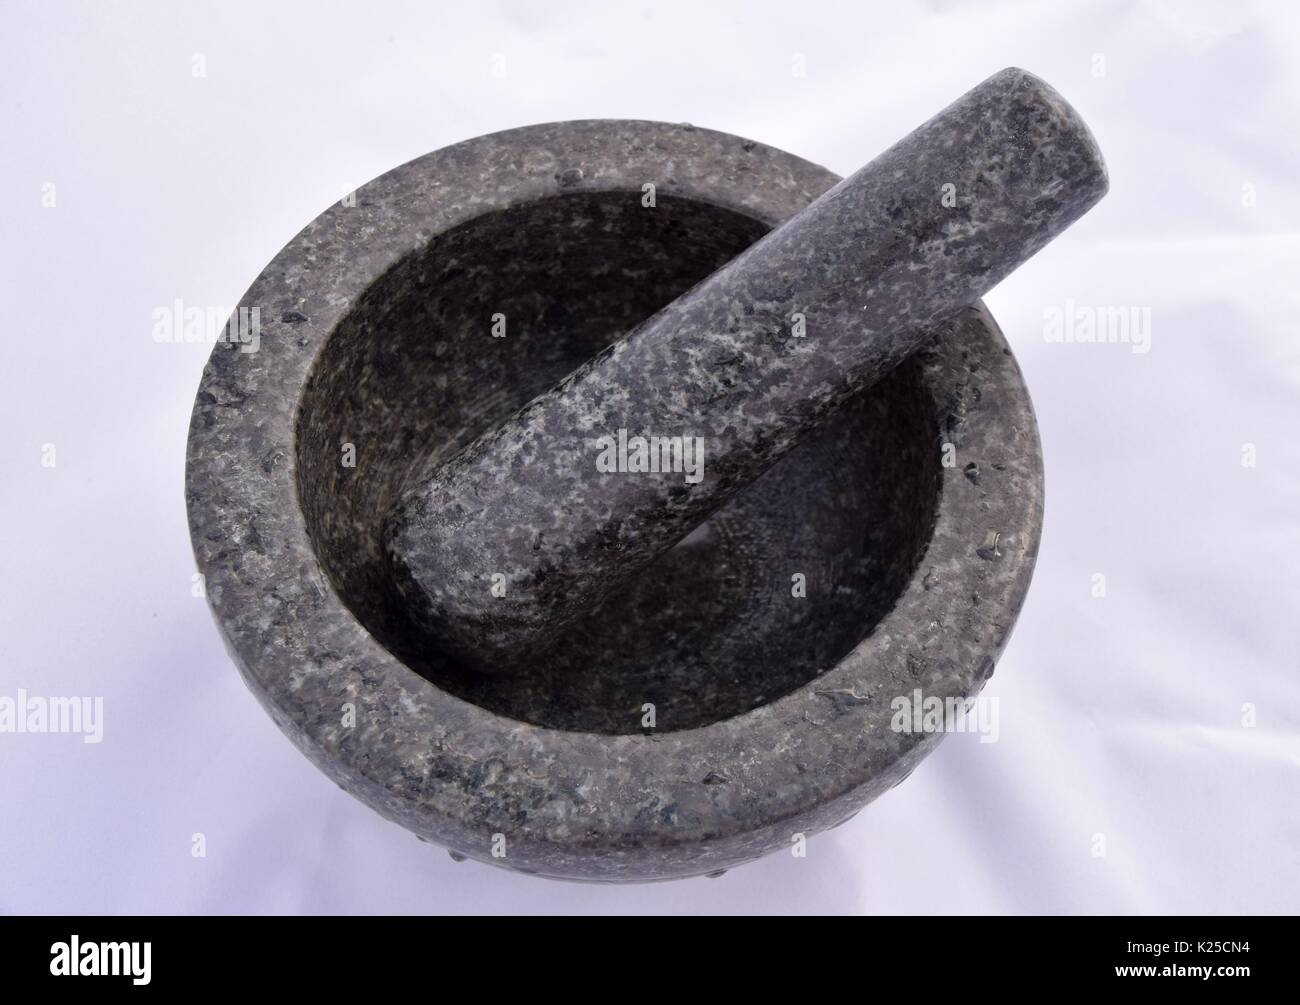 Mortar and pestle made of black marble or granite, grind the spices, mortar grinding machine, prepare ingredients or substances, preparing medicines Stock Photo